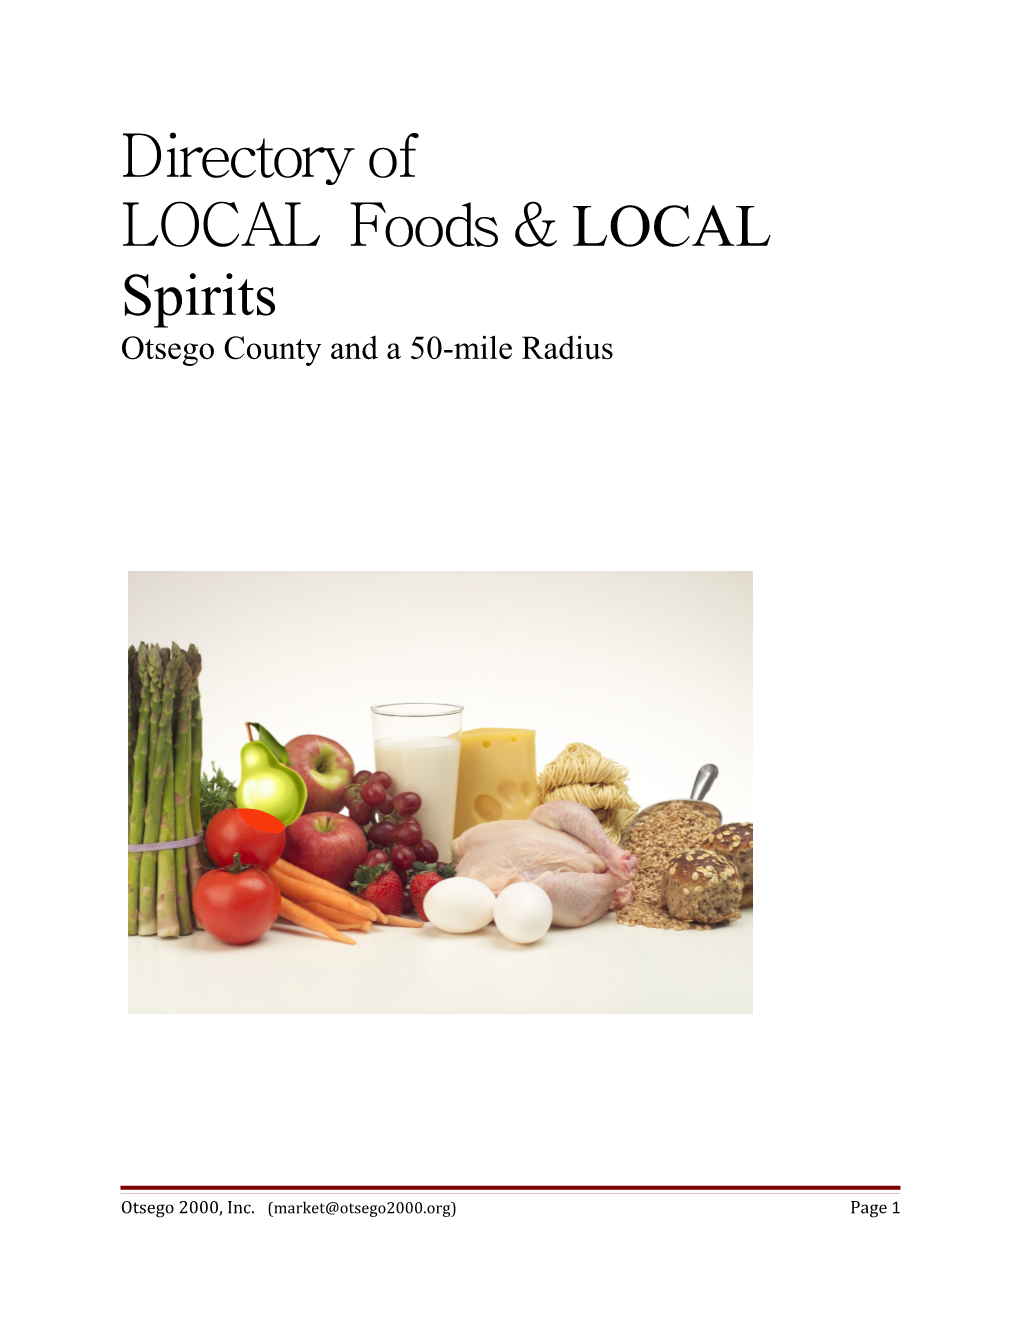 Directory of LOCAL Foods & LOCAL Spirits